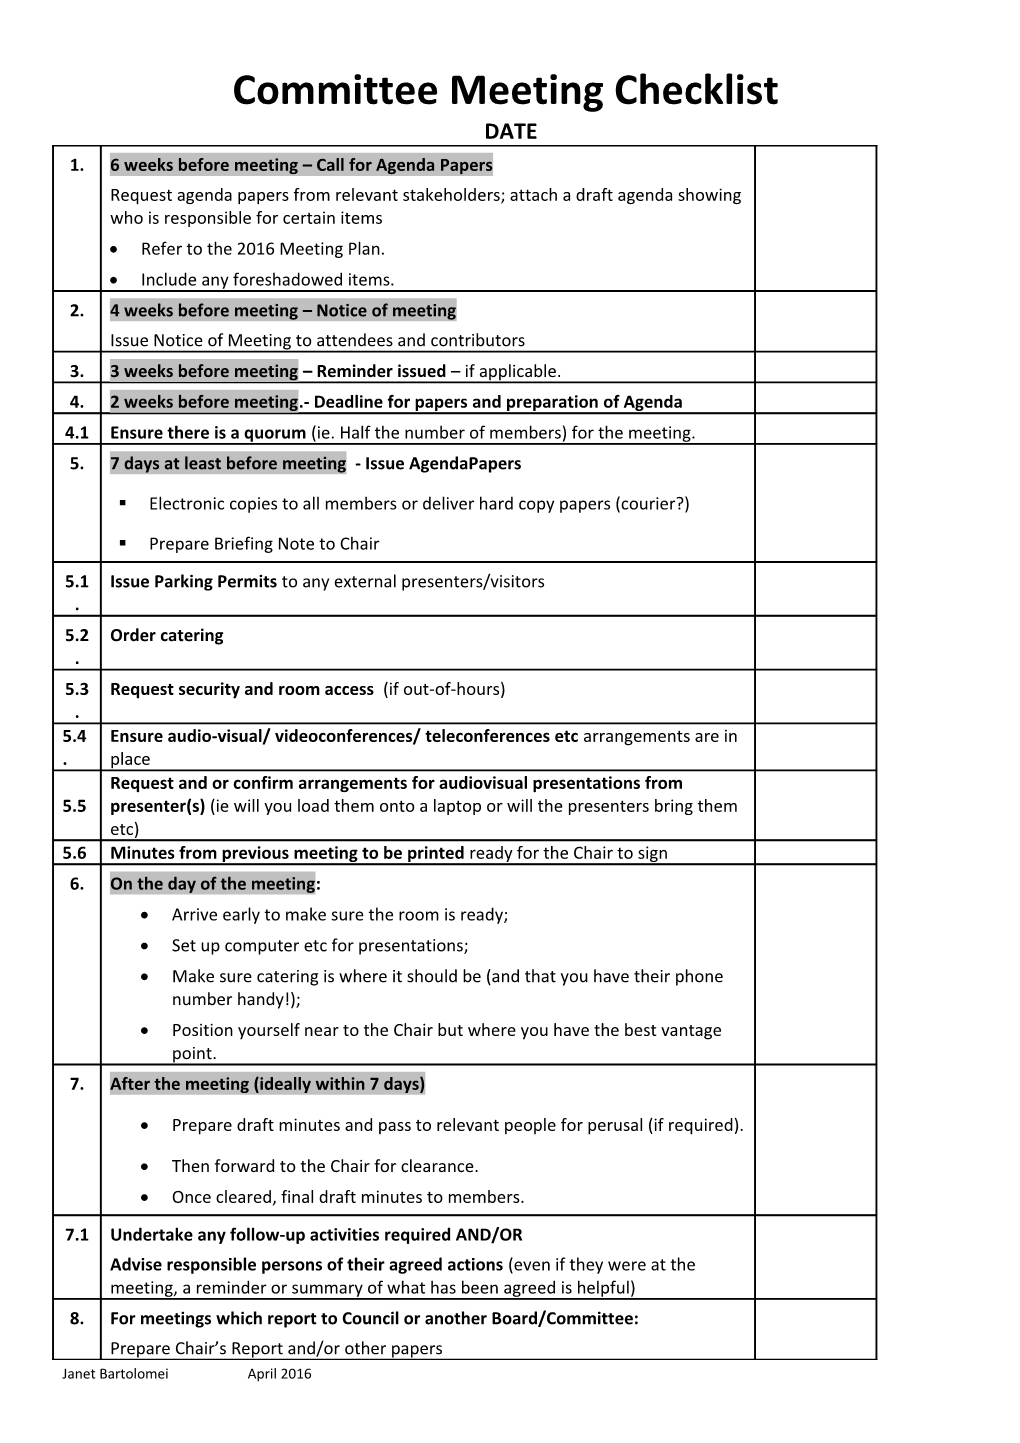 Committee Meeting Checklist